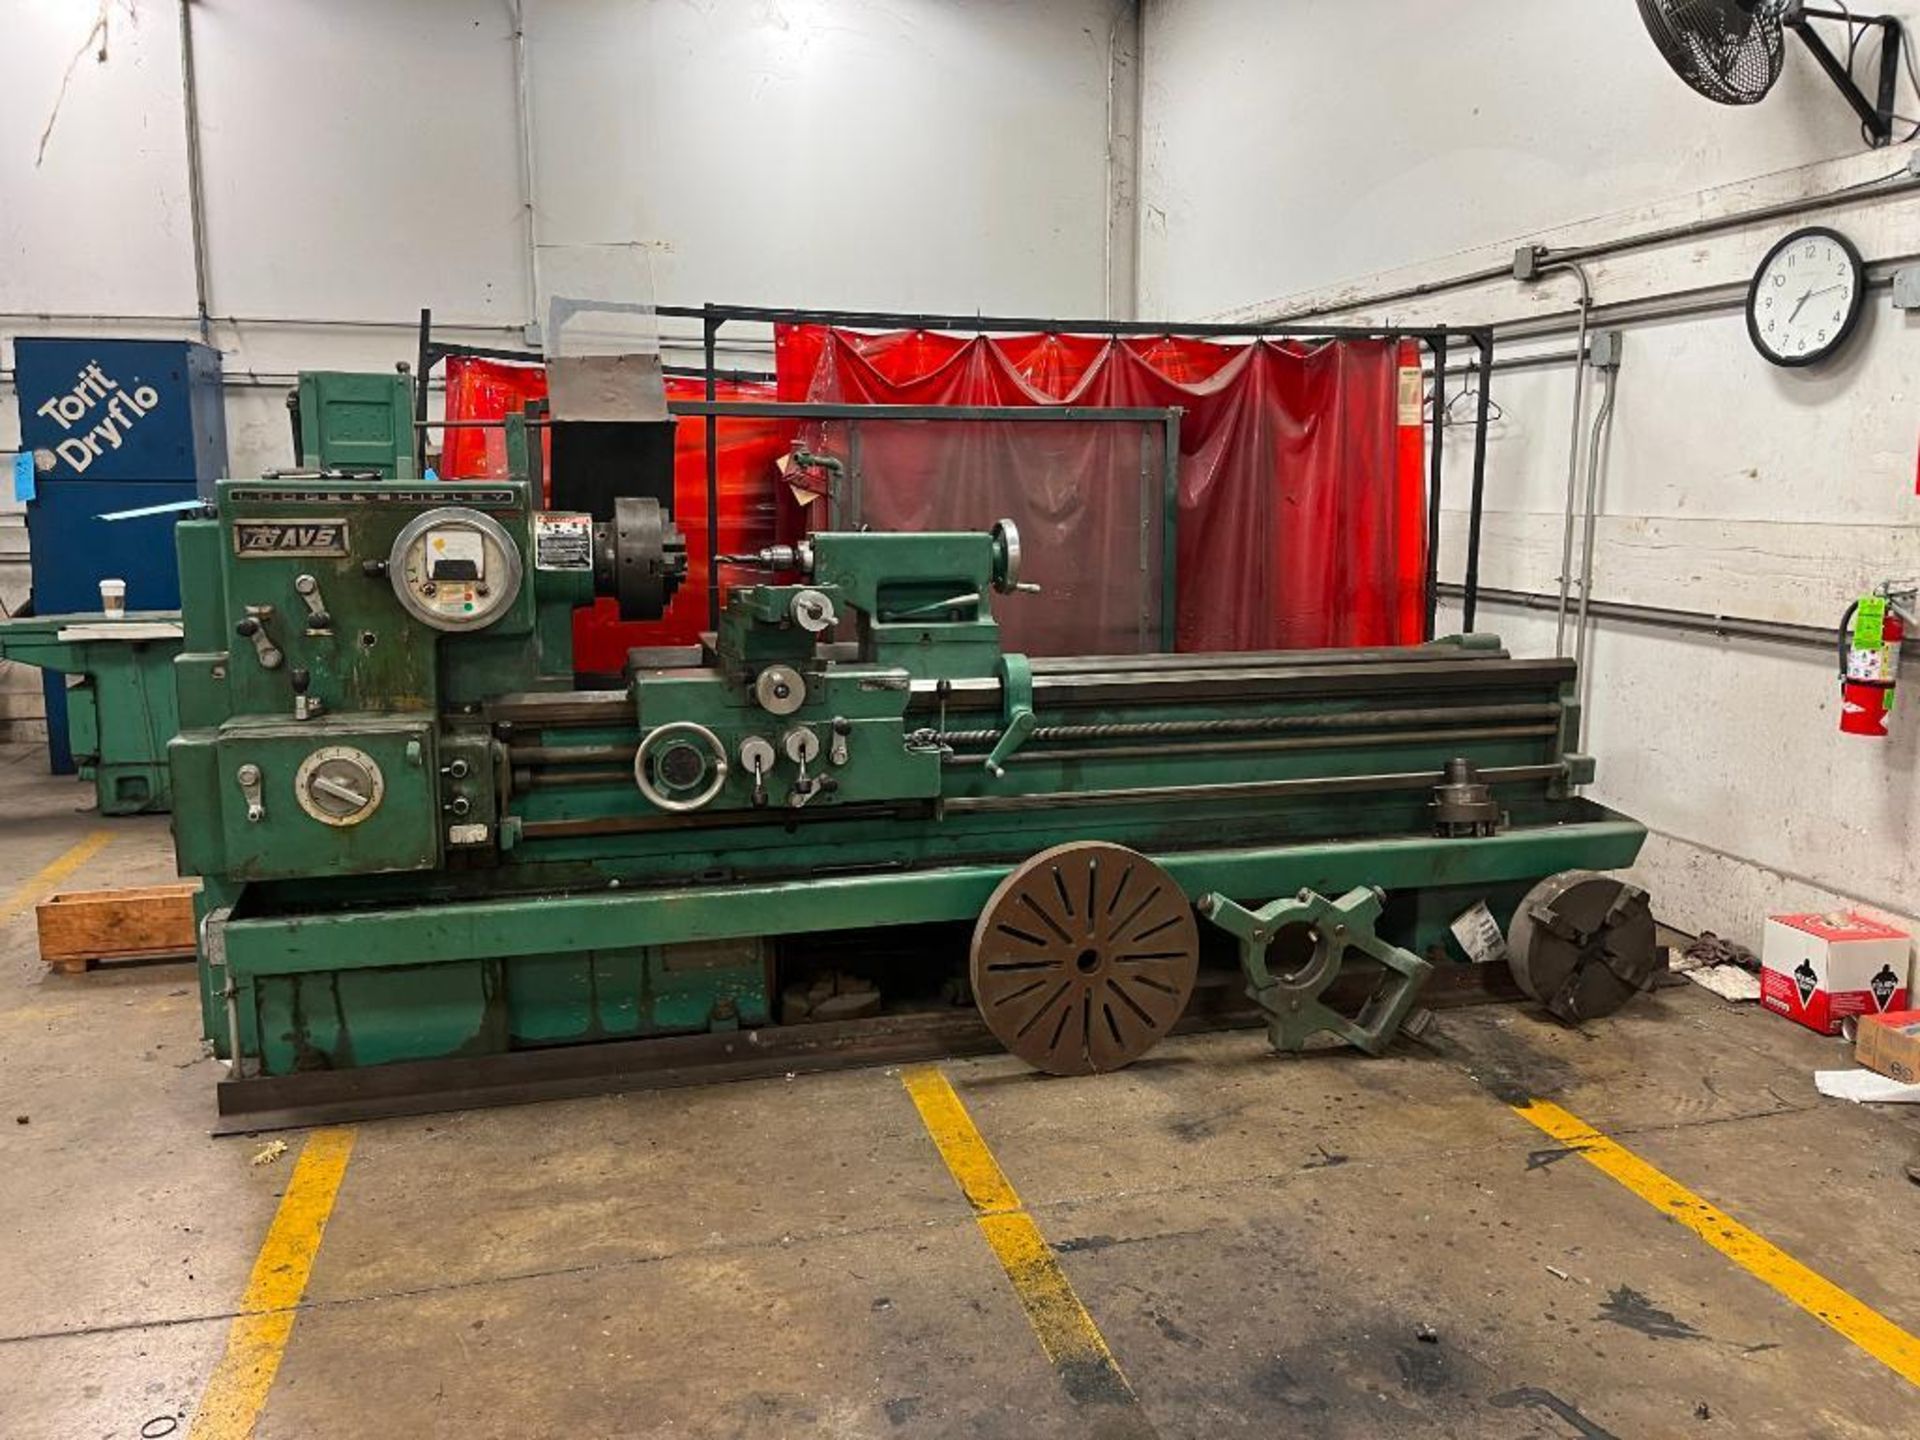 Lodge & Shipley AVS Engine Lathe, 24" x 72" with 12" 3 Jaw Chuck, Tailstock Steady Rest, Model 2010/